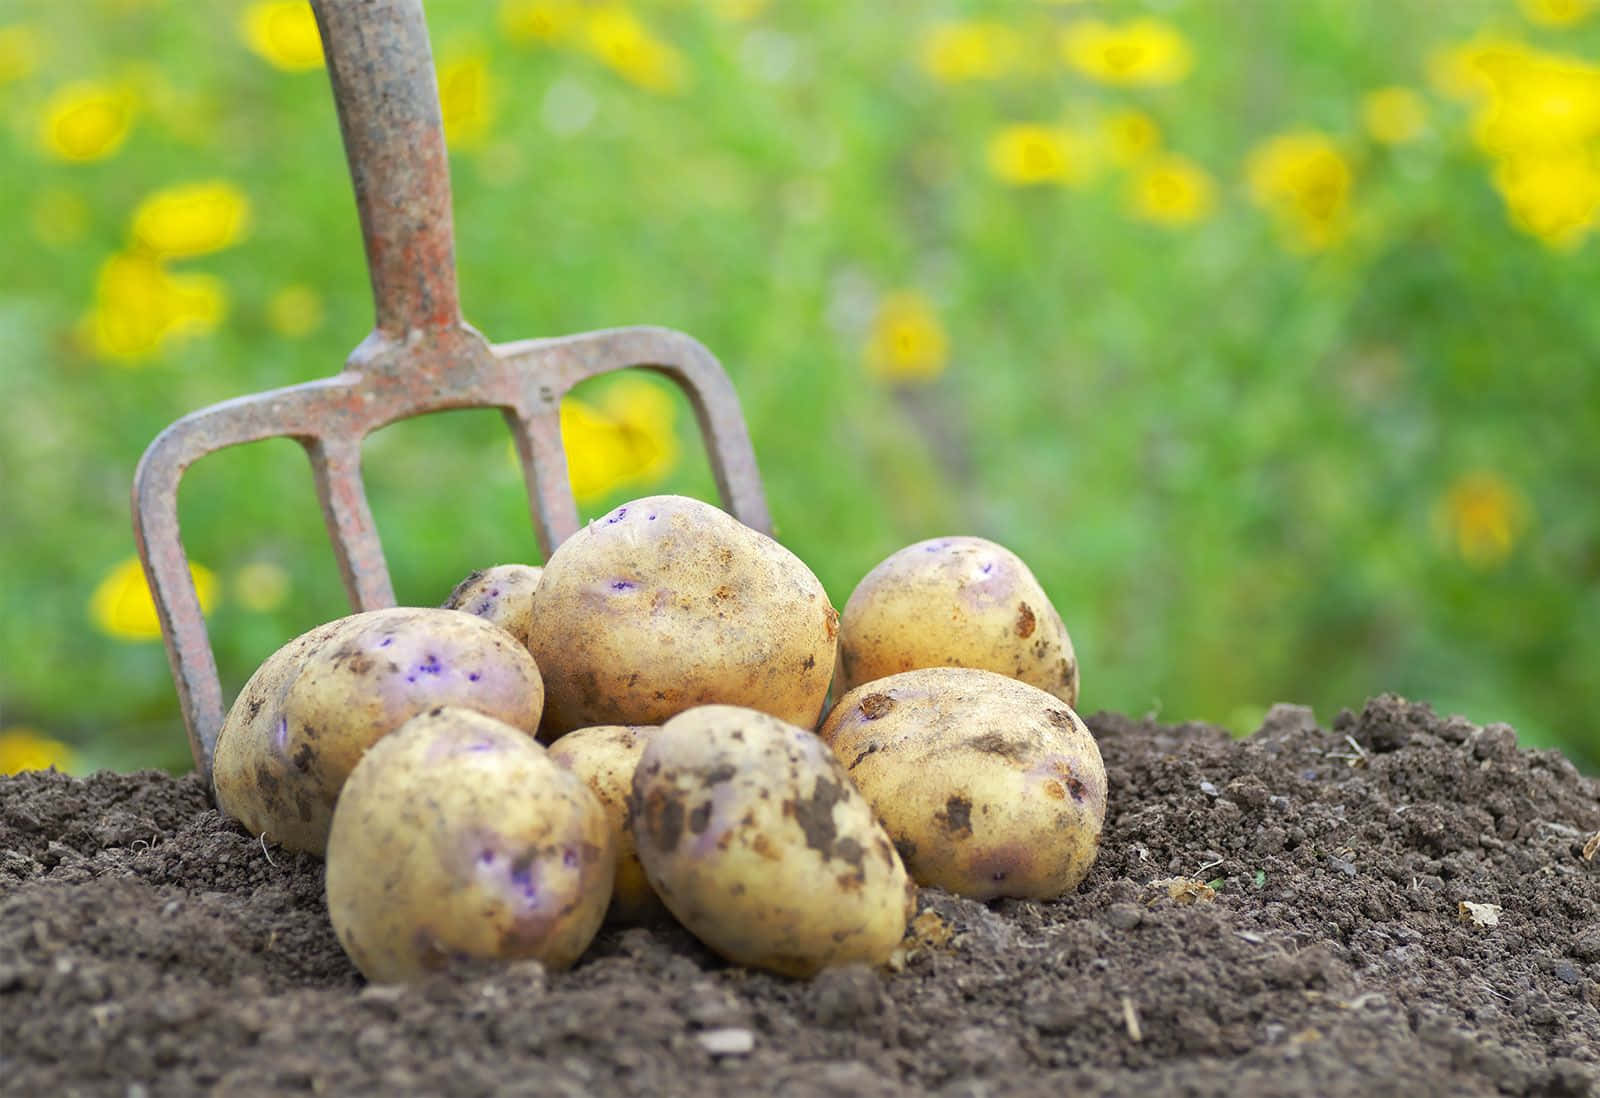 Potatoes, a staple of any healthy diet